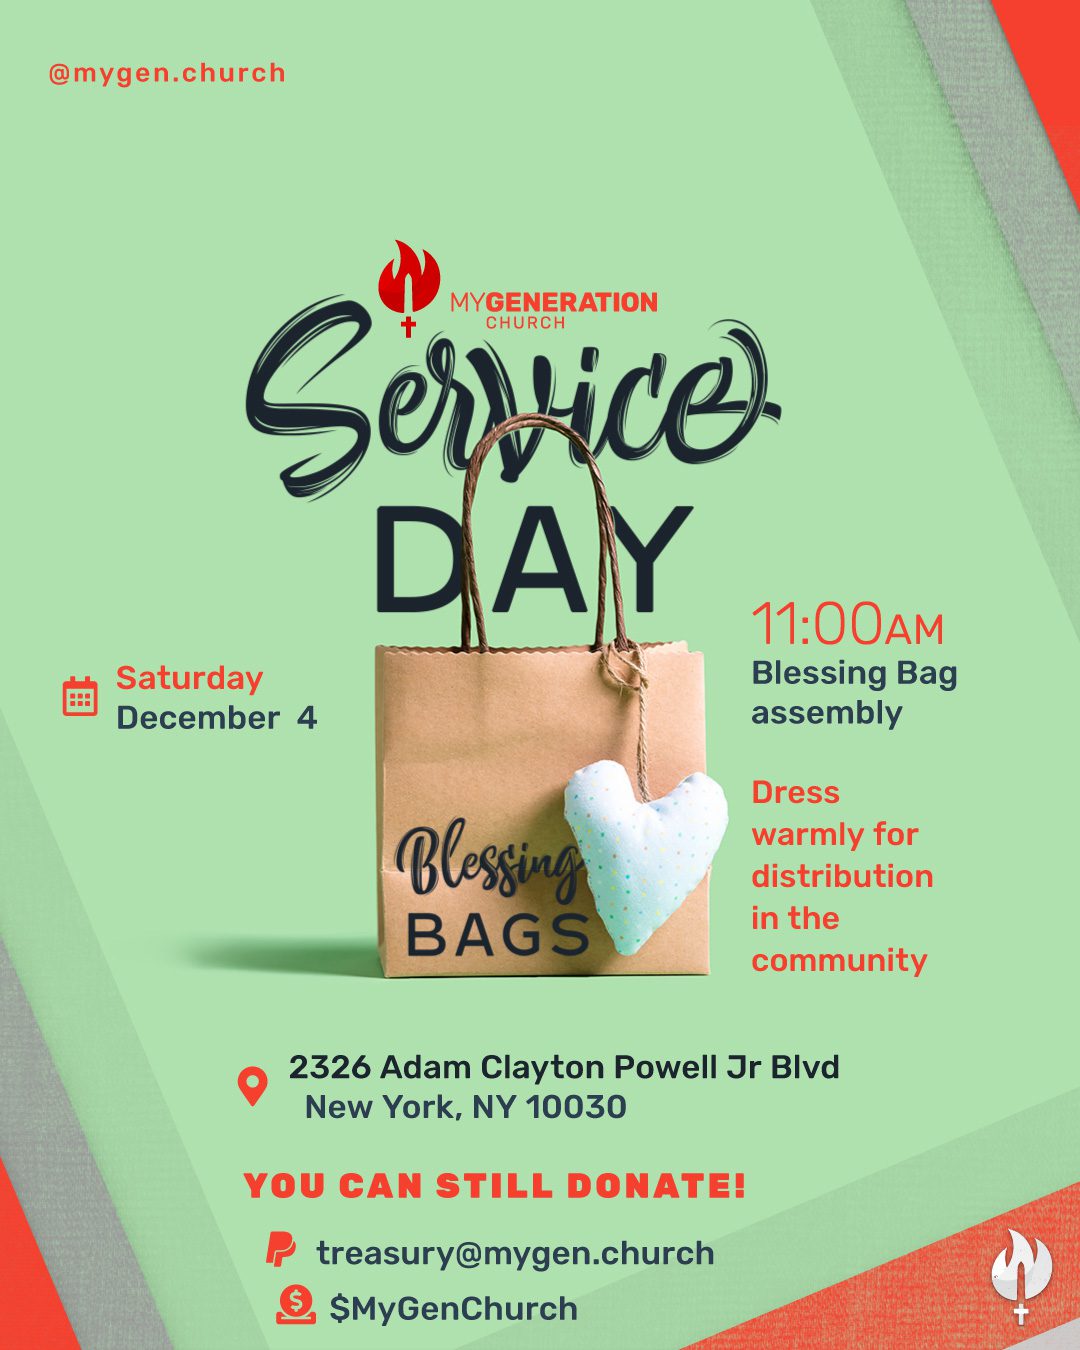 Service Day with Blessing Bags at MyGeneration Church